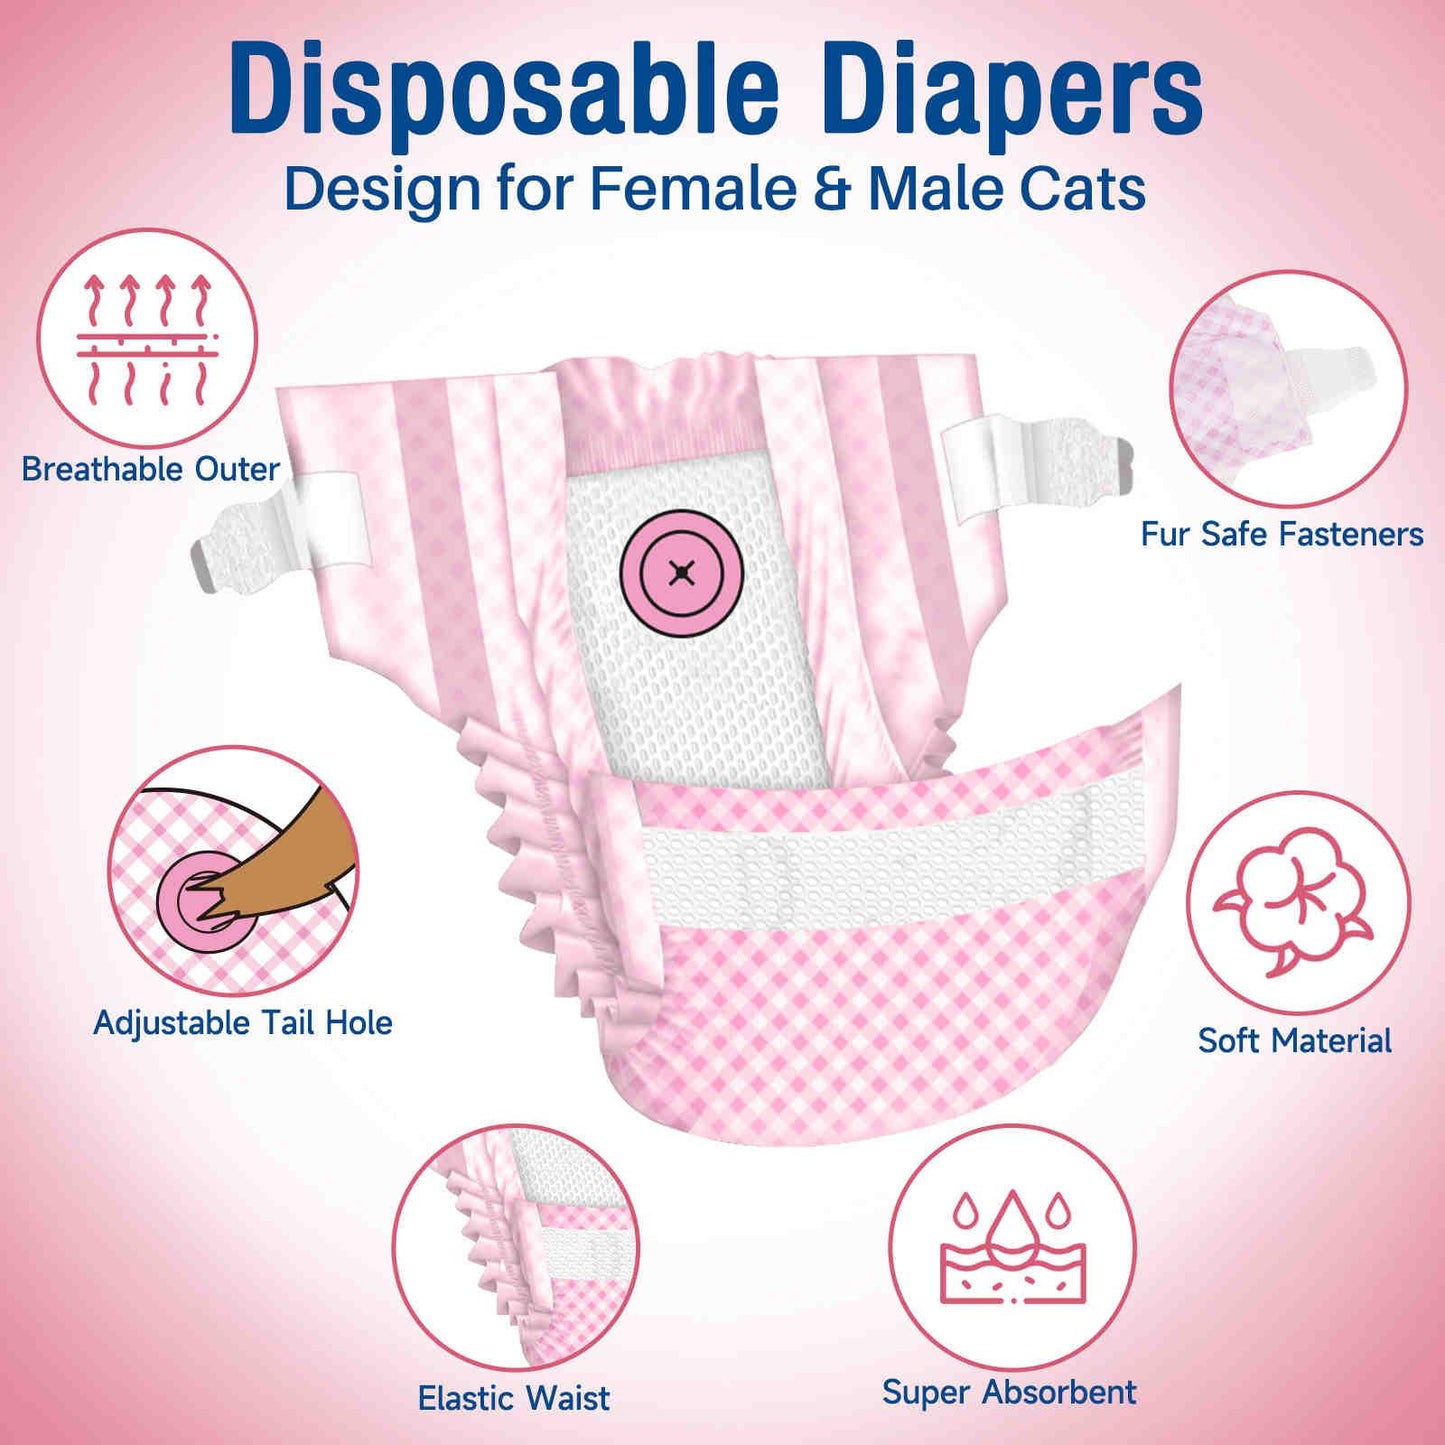 Disposable Cat Diapers, Adjustable Foam Tail Hole, 24 Pcs, 1 Pack